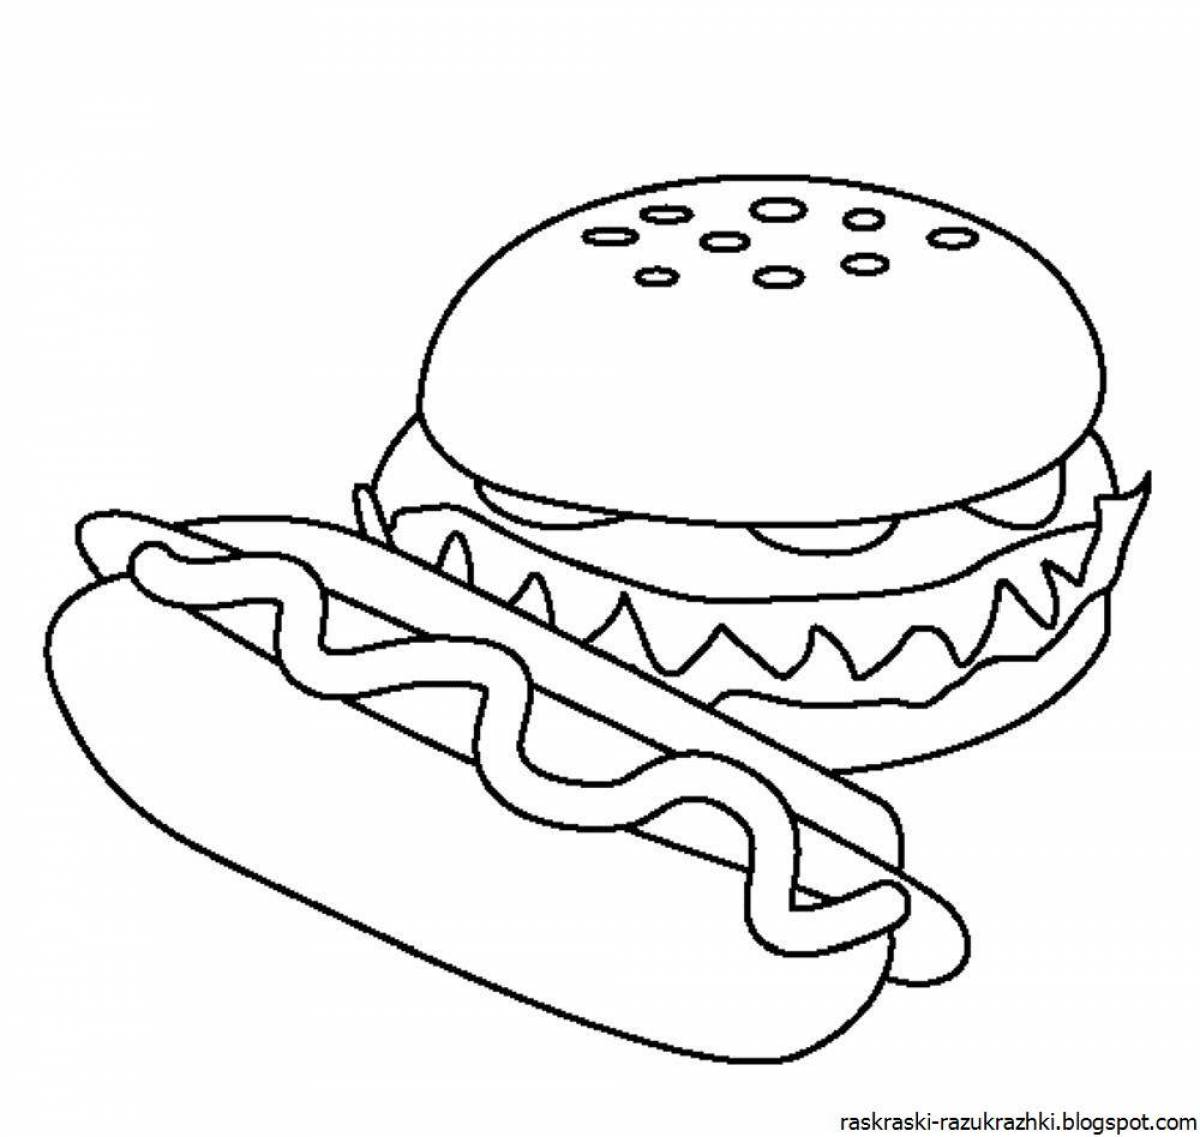 Adorable burger coloring page